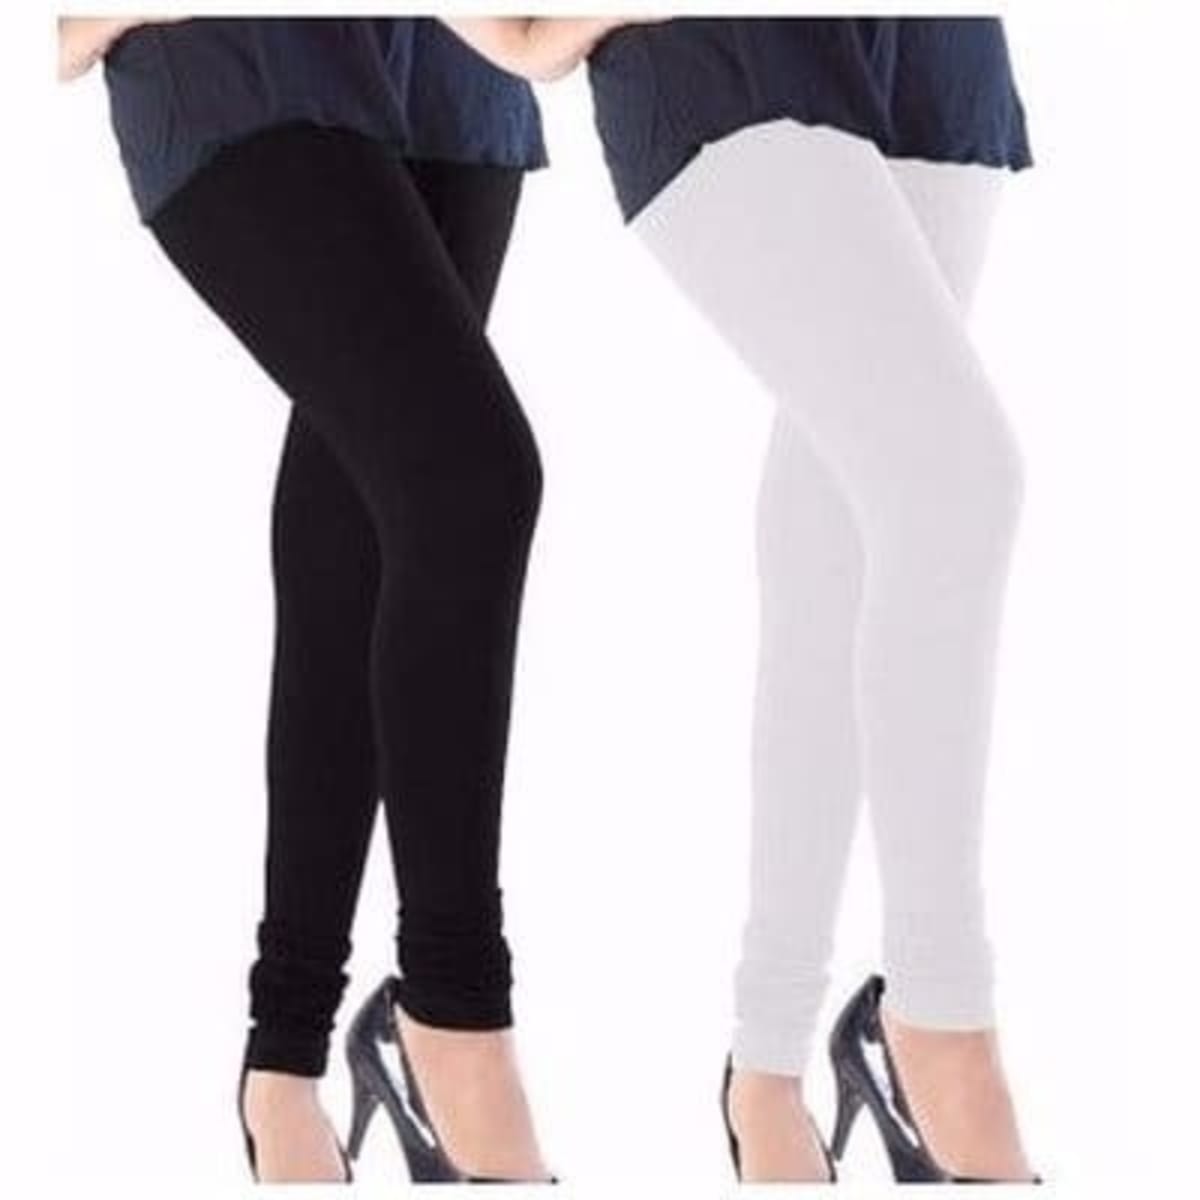 2 Pack Plain Opaque Tights